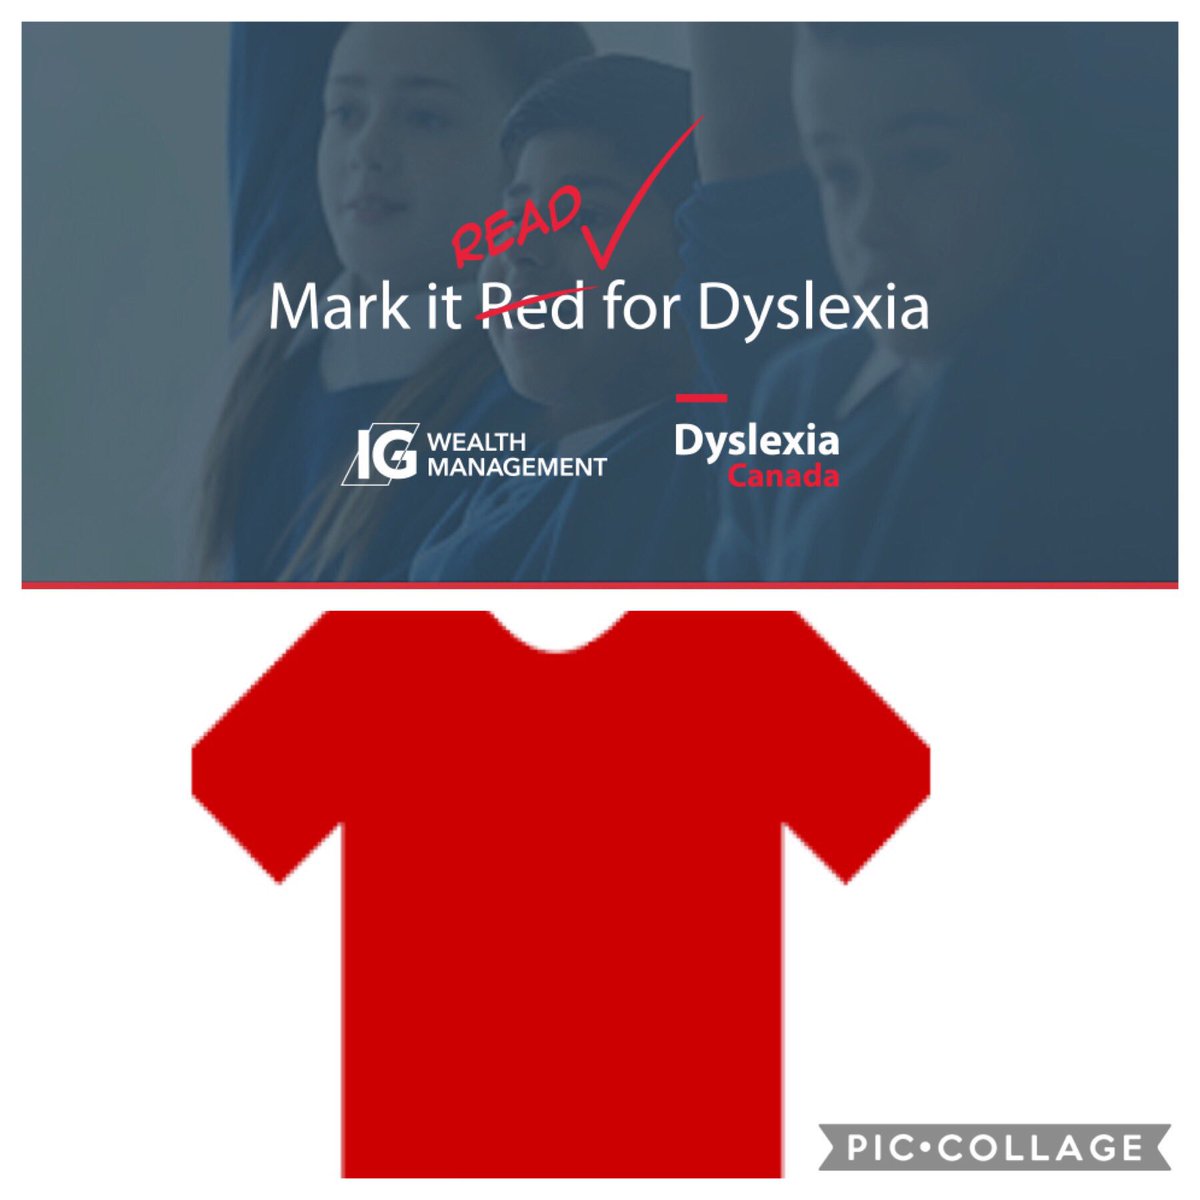 Panthers, remember to wear red tomorrow in support of the Dyslexia Awareness Campaign! @spps_panthers @JanetJackowski @Mr_M_Miller #markitread